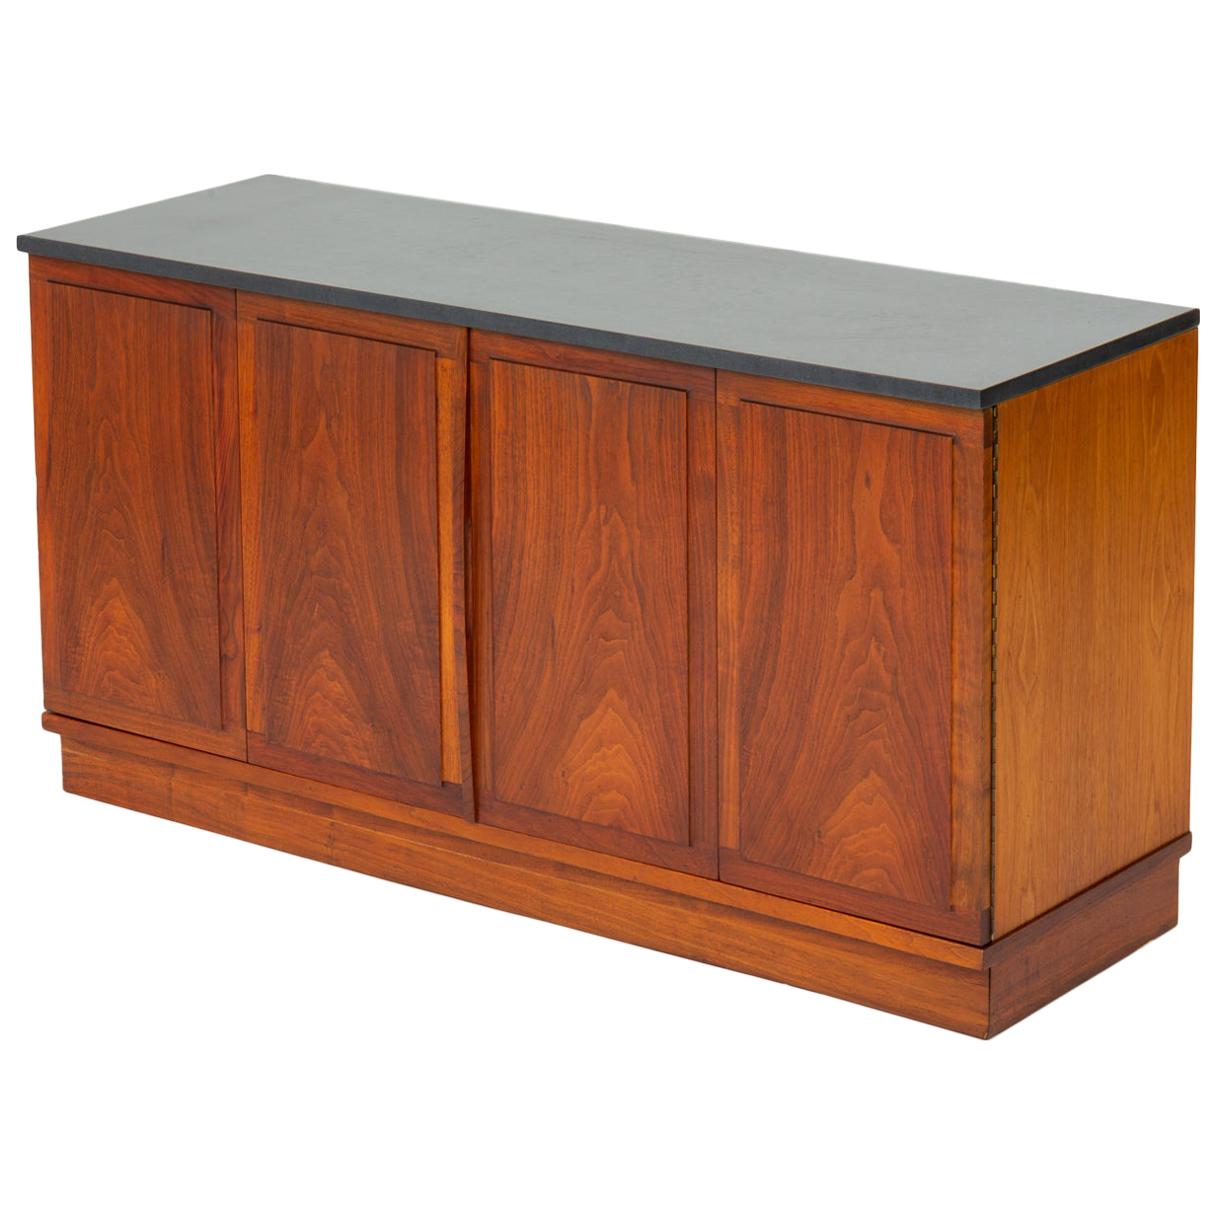 Slate-Top Walnut Sideboard by Jack Cartwright for Founders